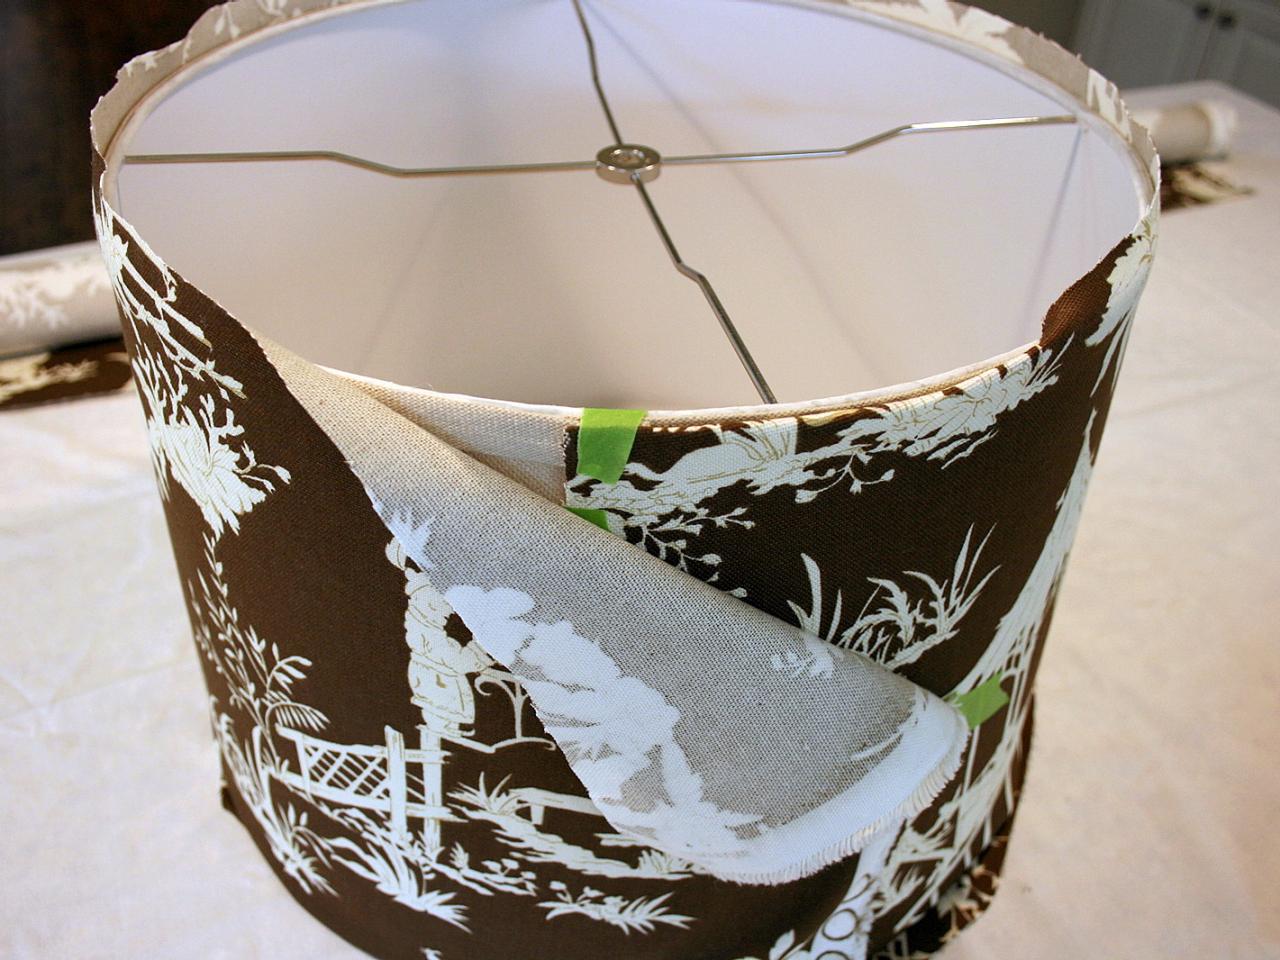 Custom Fabric Covered Lampshade, How To Make A Lampshade Cover With Fabric